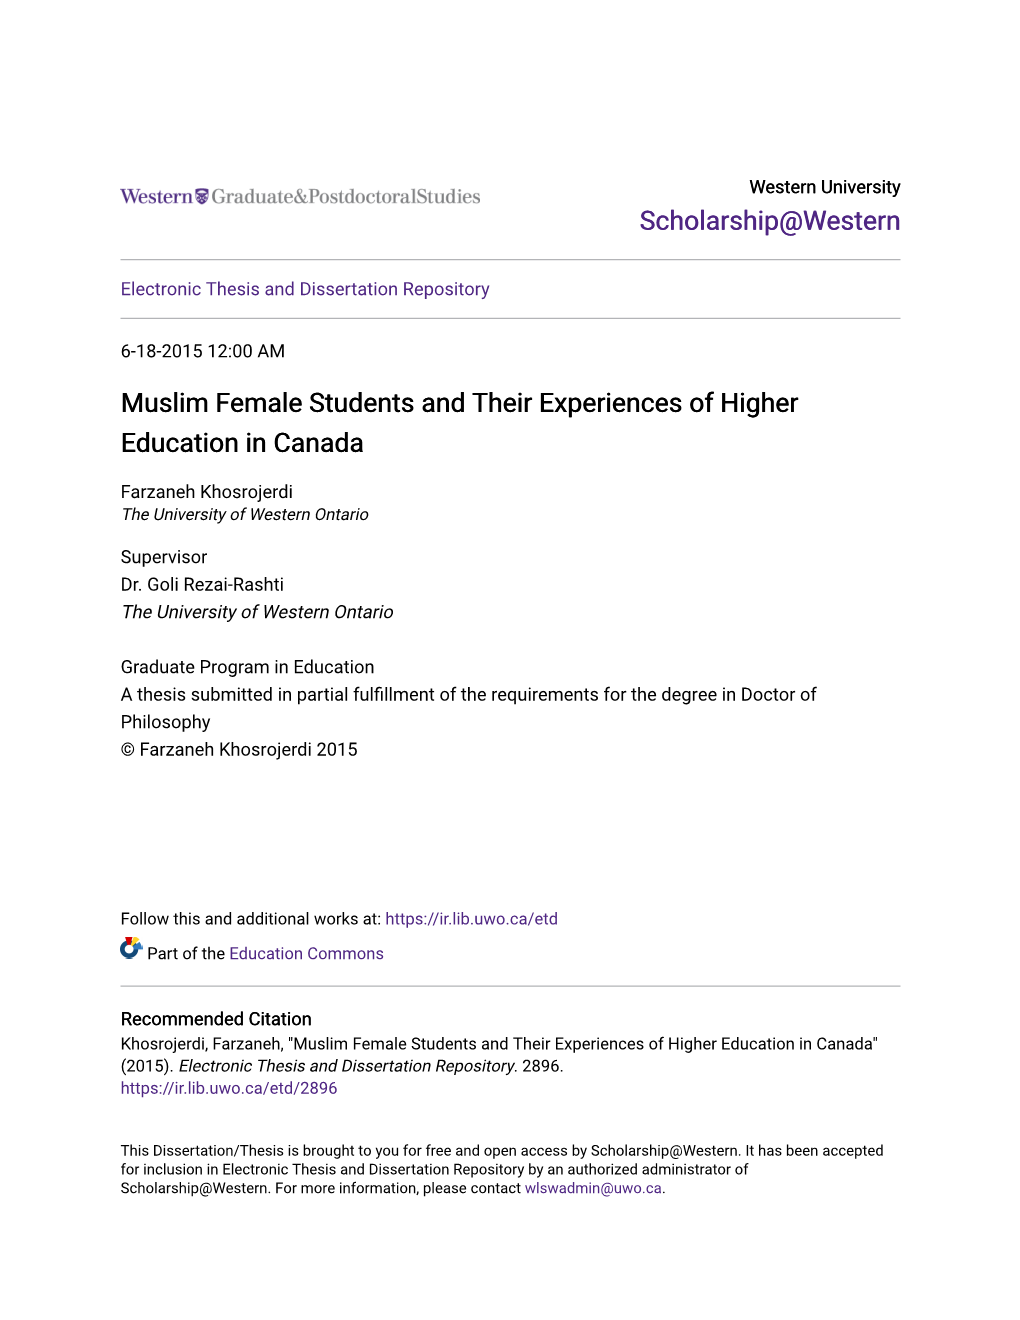 Muslim Female Students and Their Experiences of Higher Education in Canada